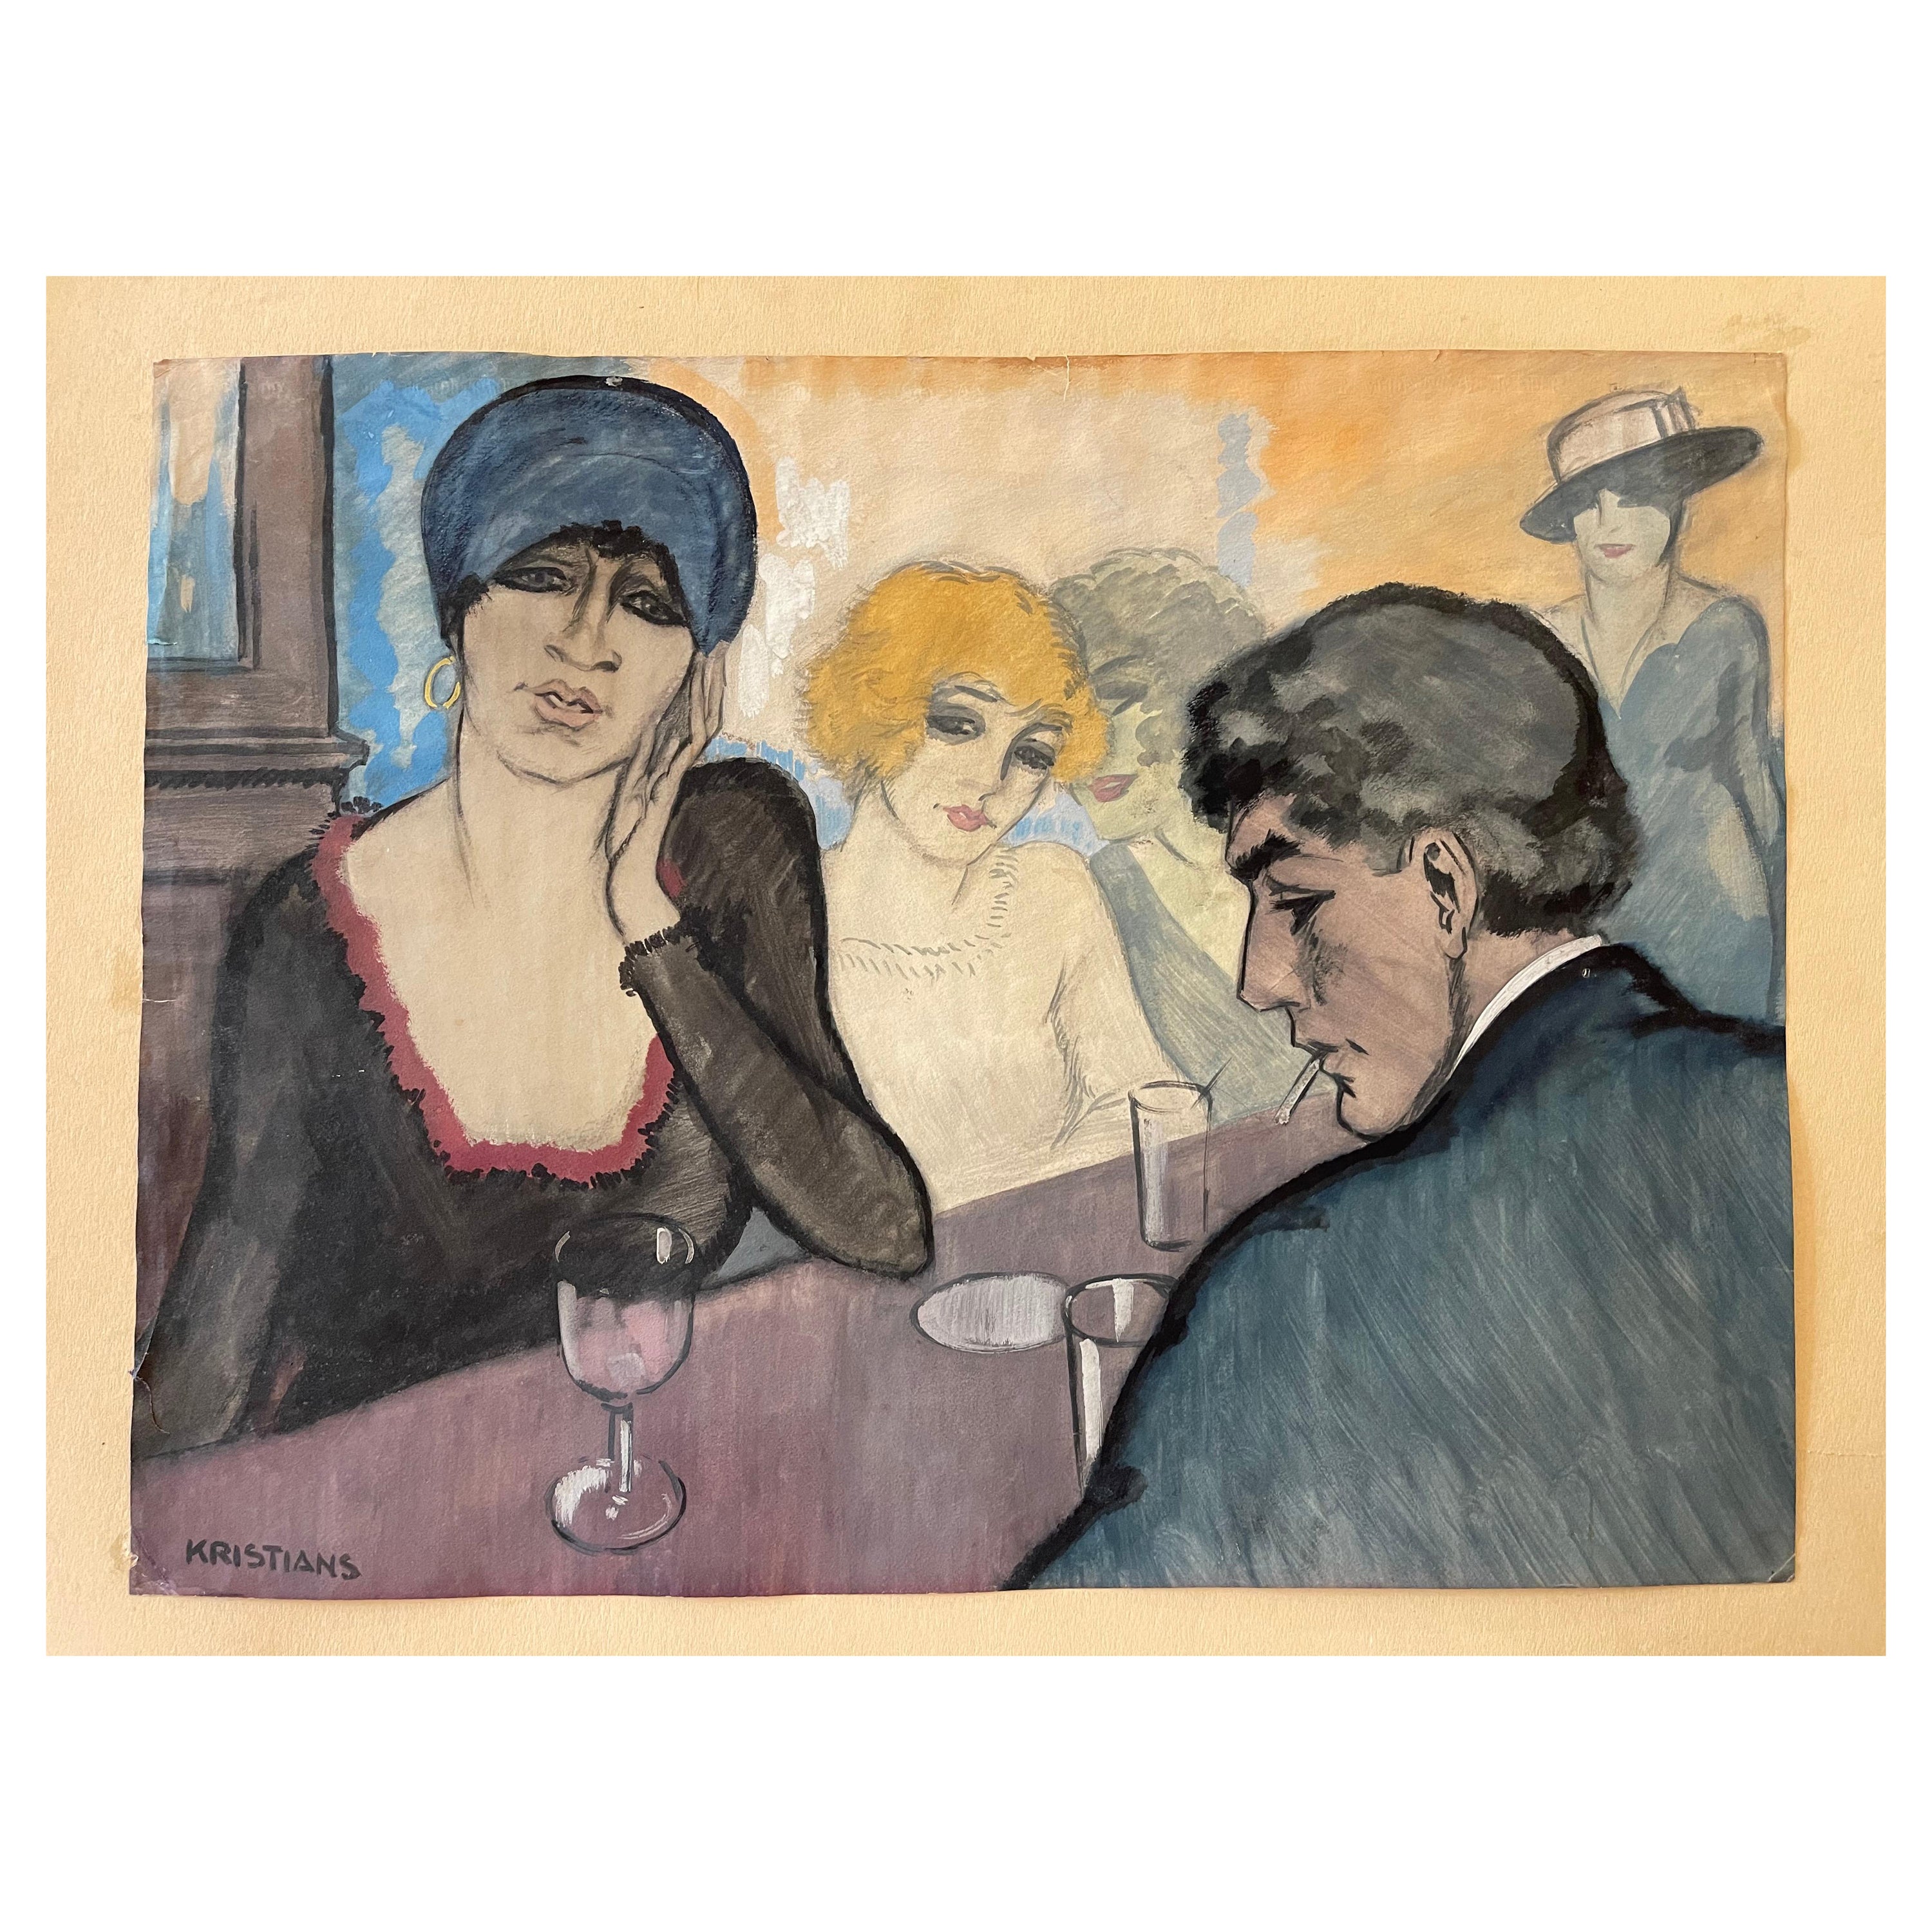 "At the Bar", Watercolor on Paper by A. J. Kristians, France, Art Déco, 1920's